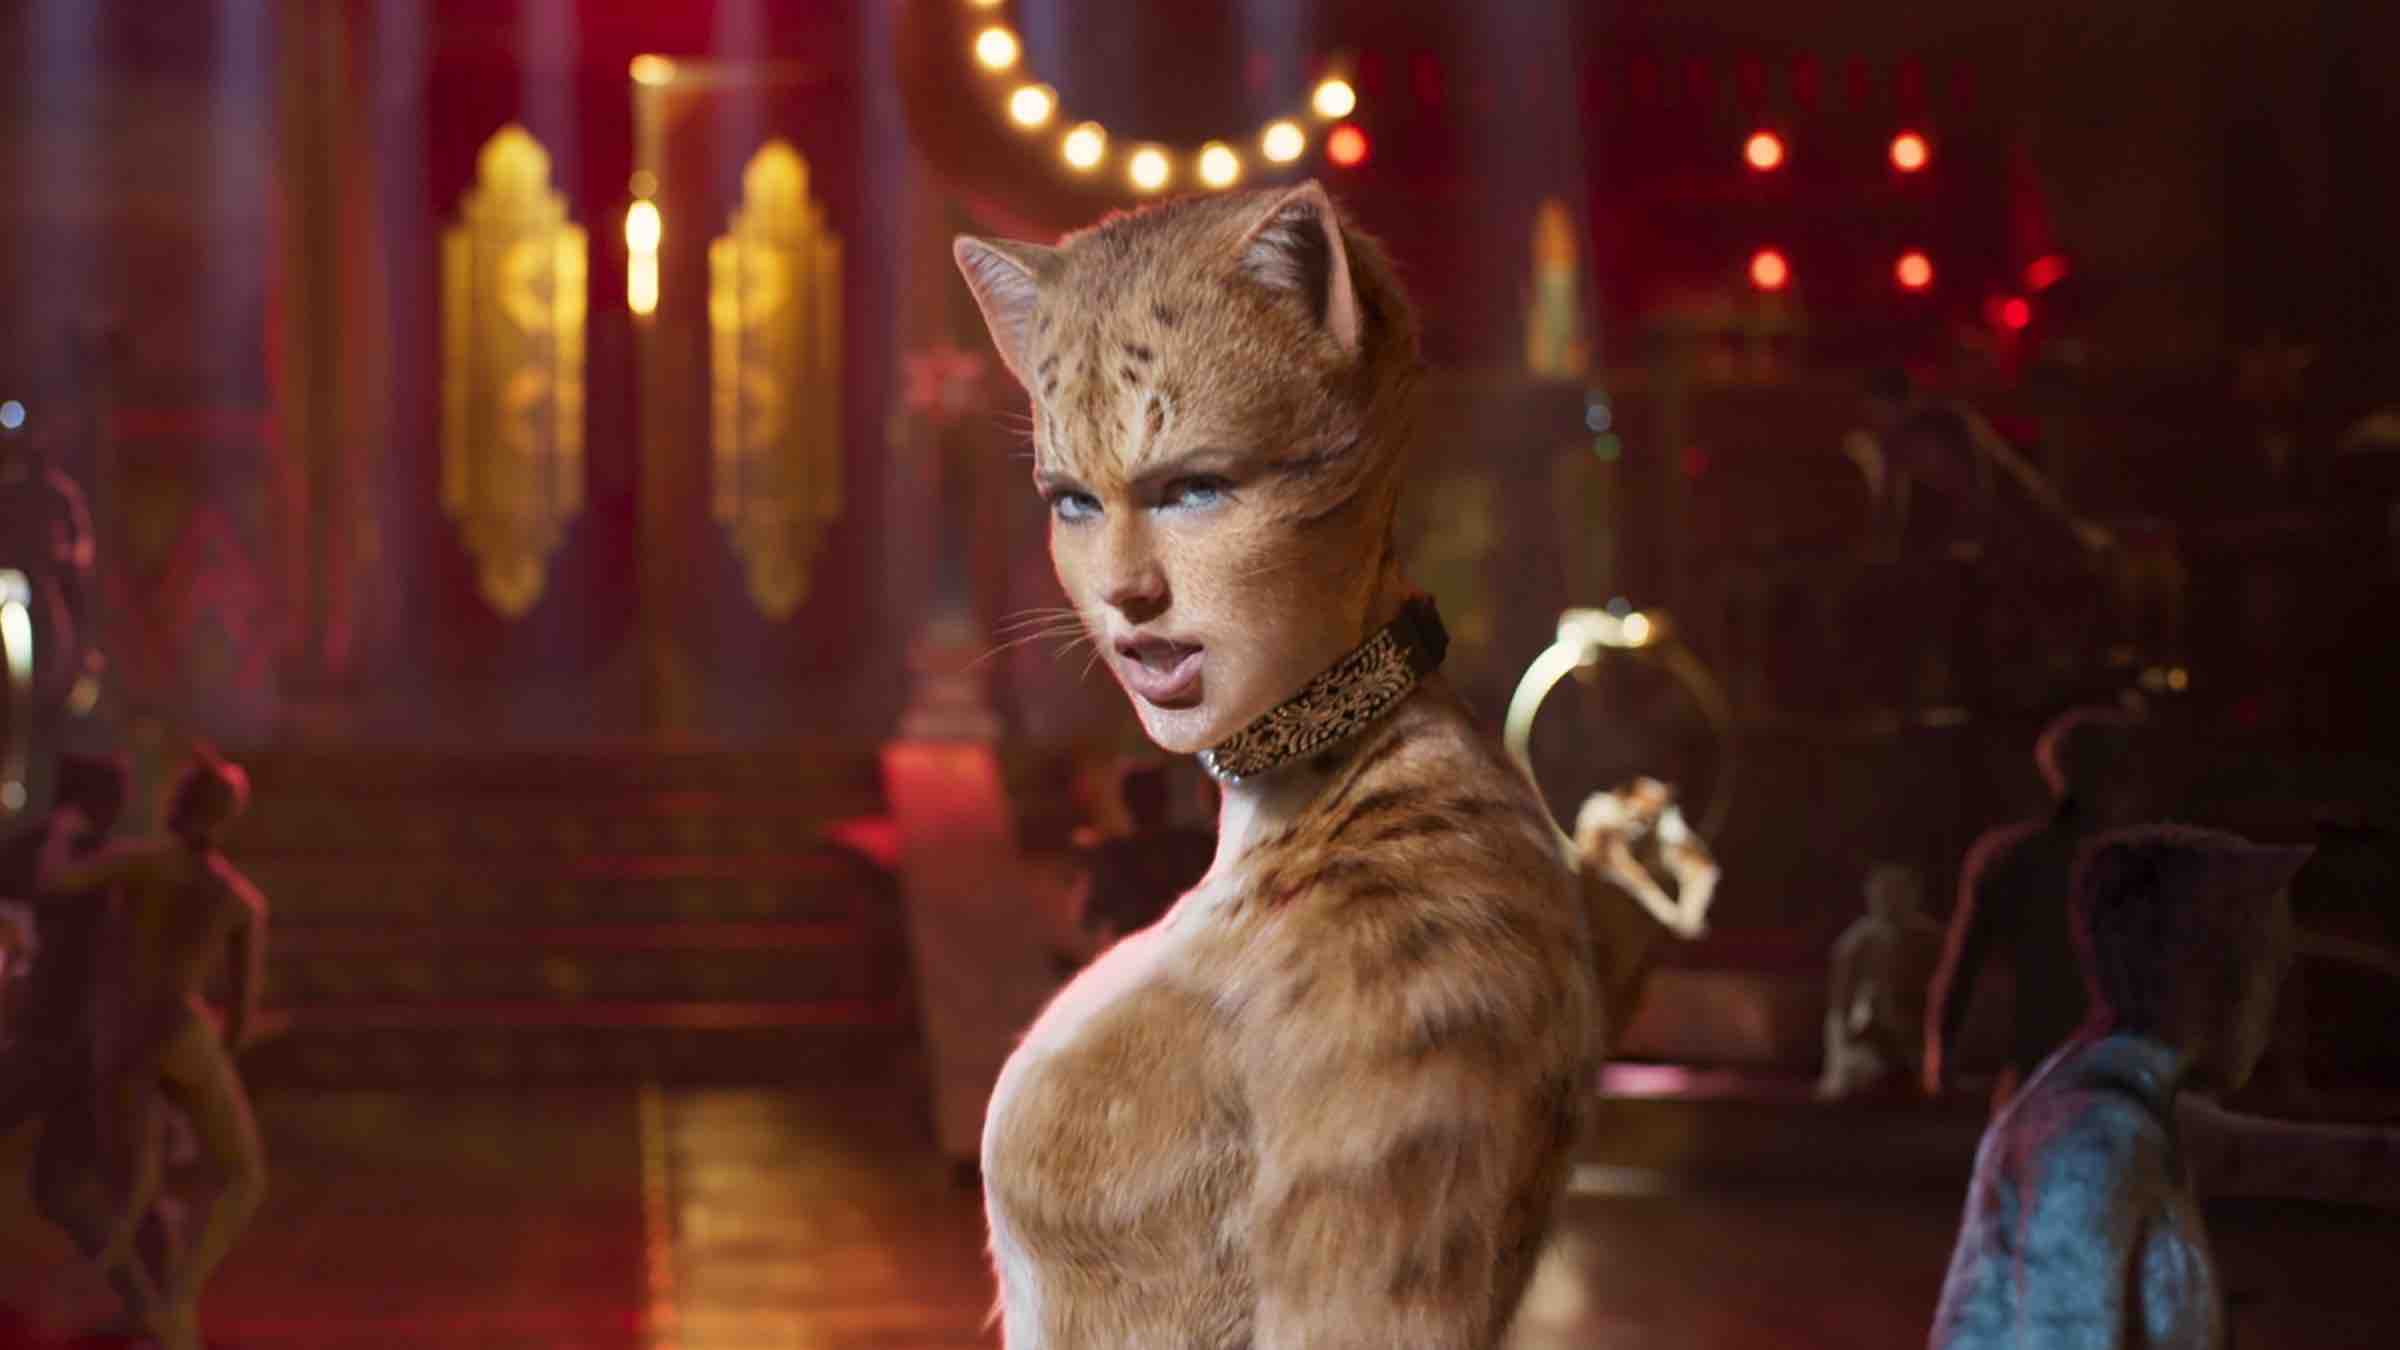 The original musical is often criticized for not having a plot, and it sounds like 'Cats' follows that trend based on the reviews. Here's what we know.